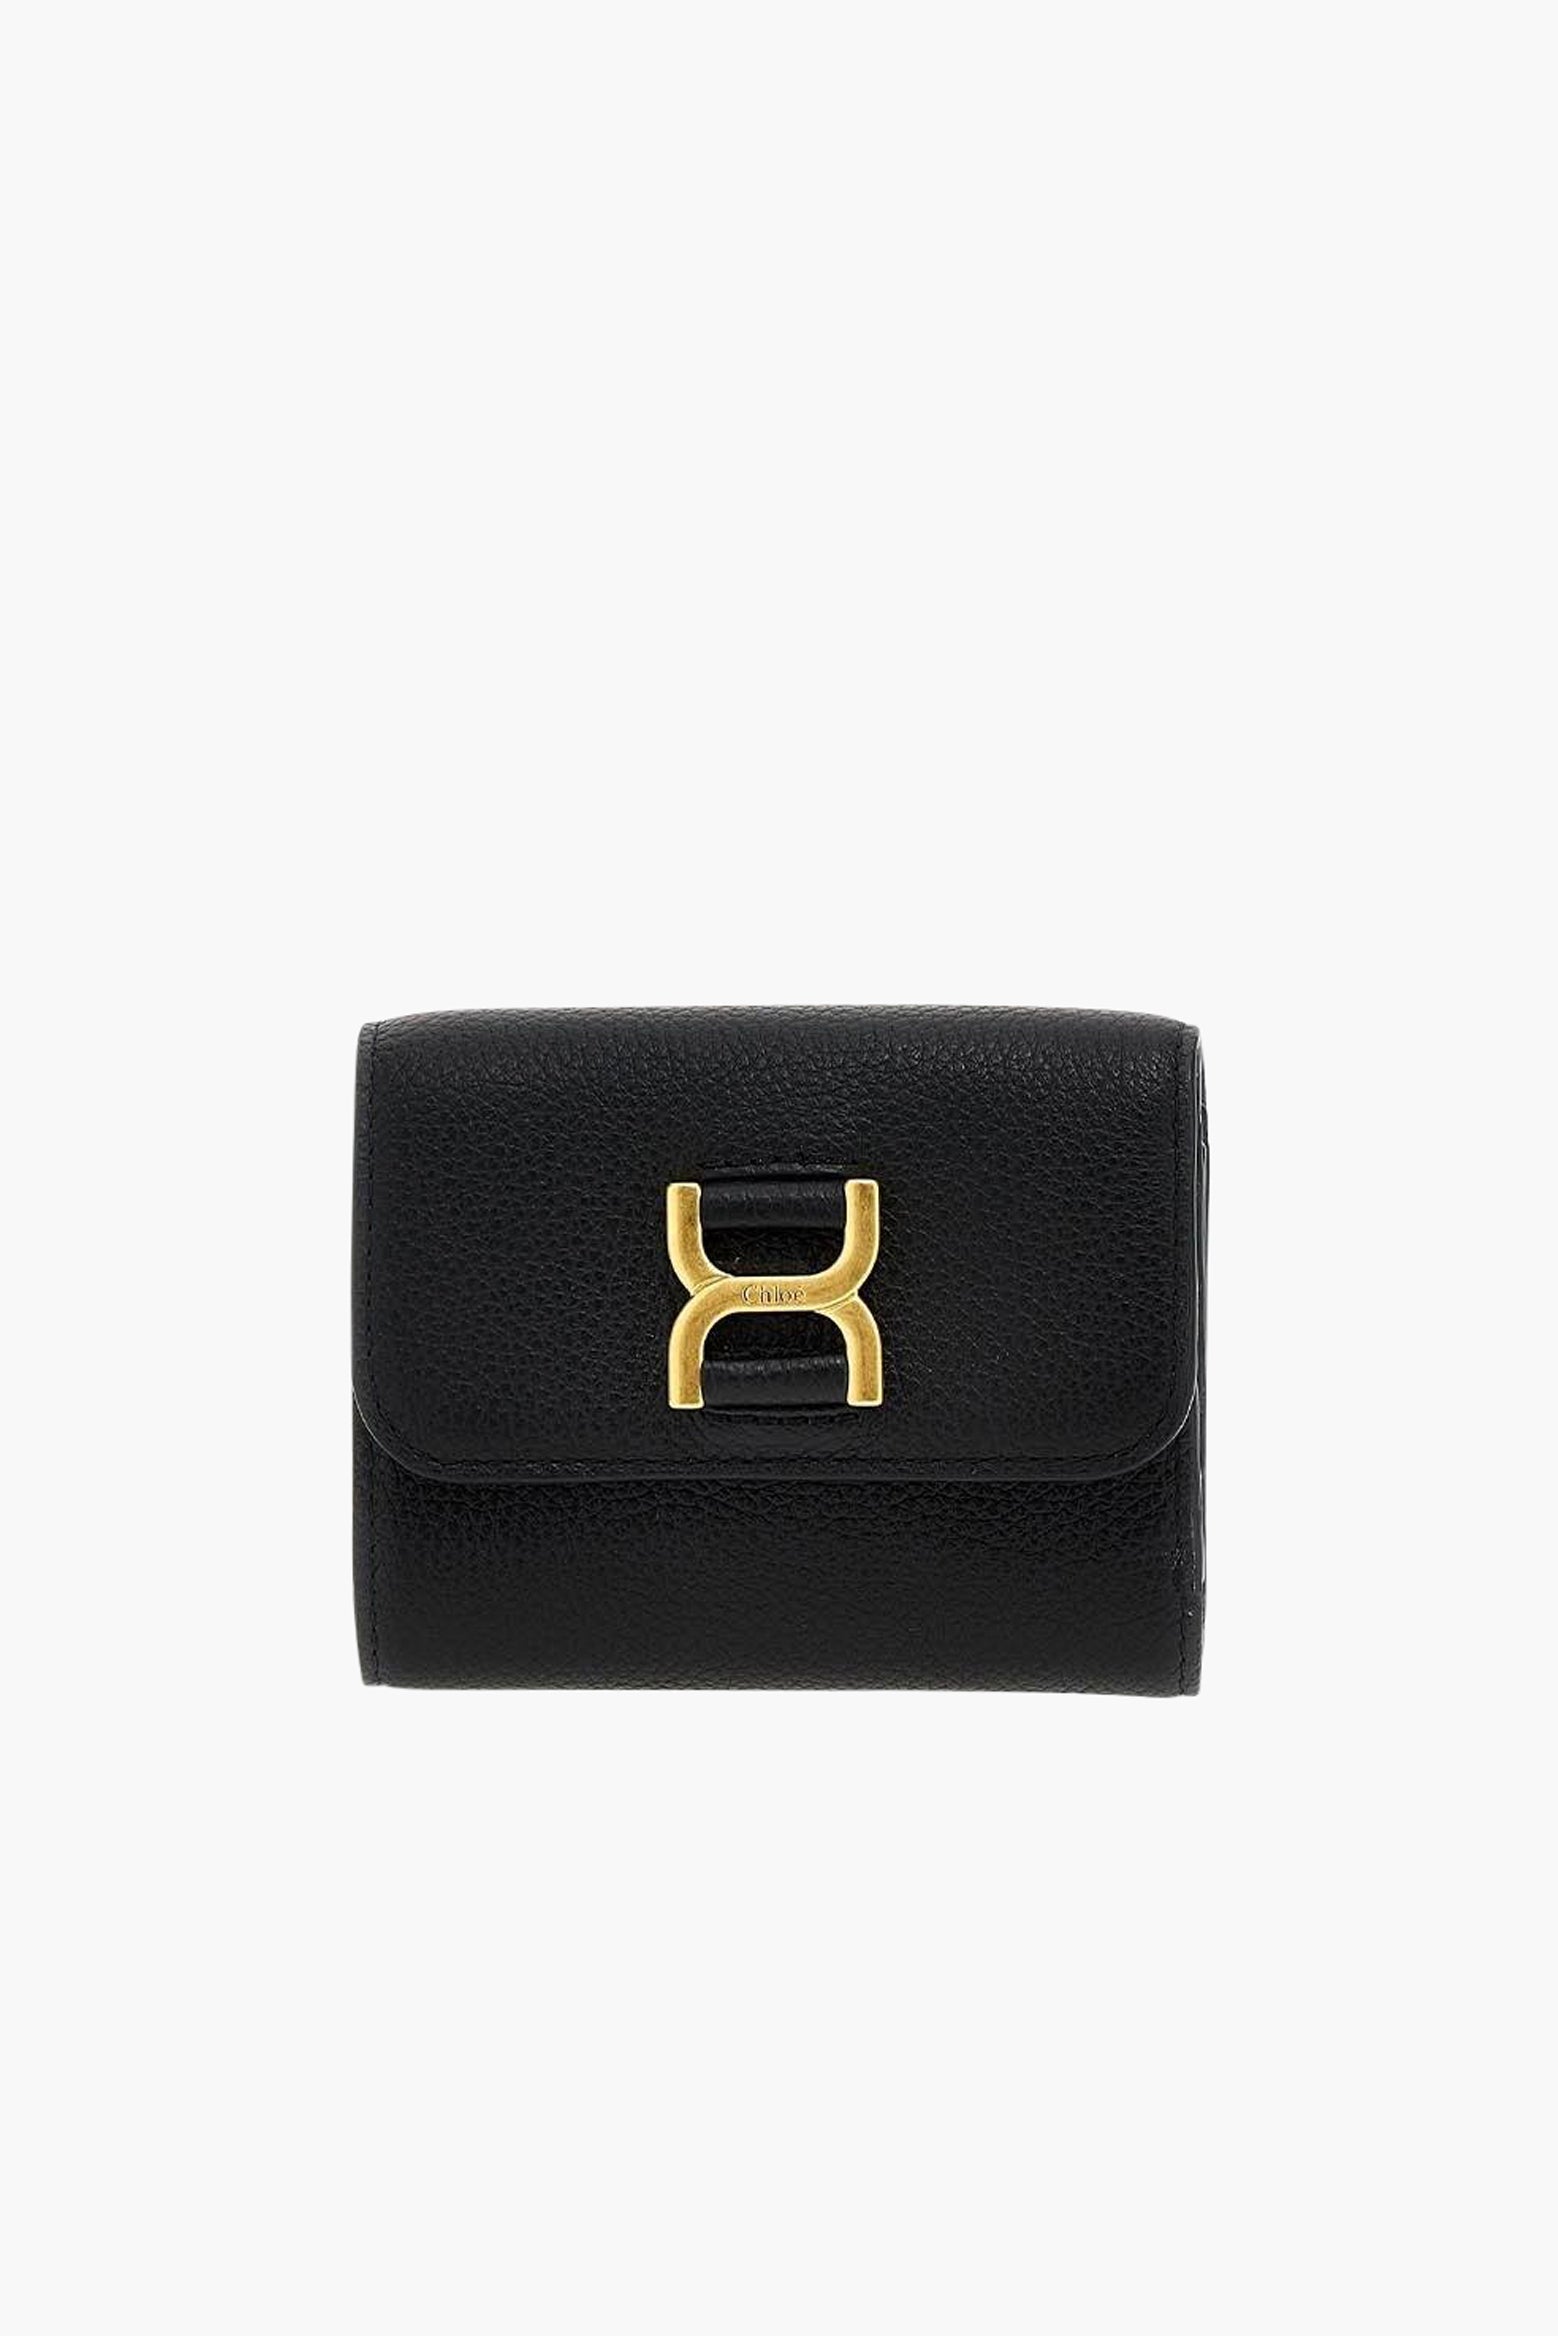 The Chloe Small Marcie Trifold in Black available at The New Trend Australia